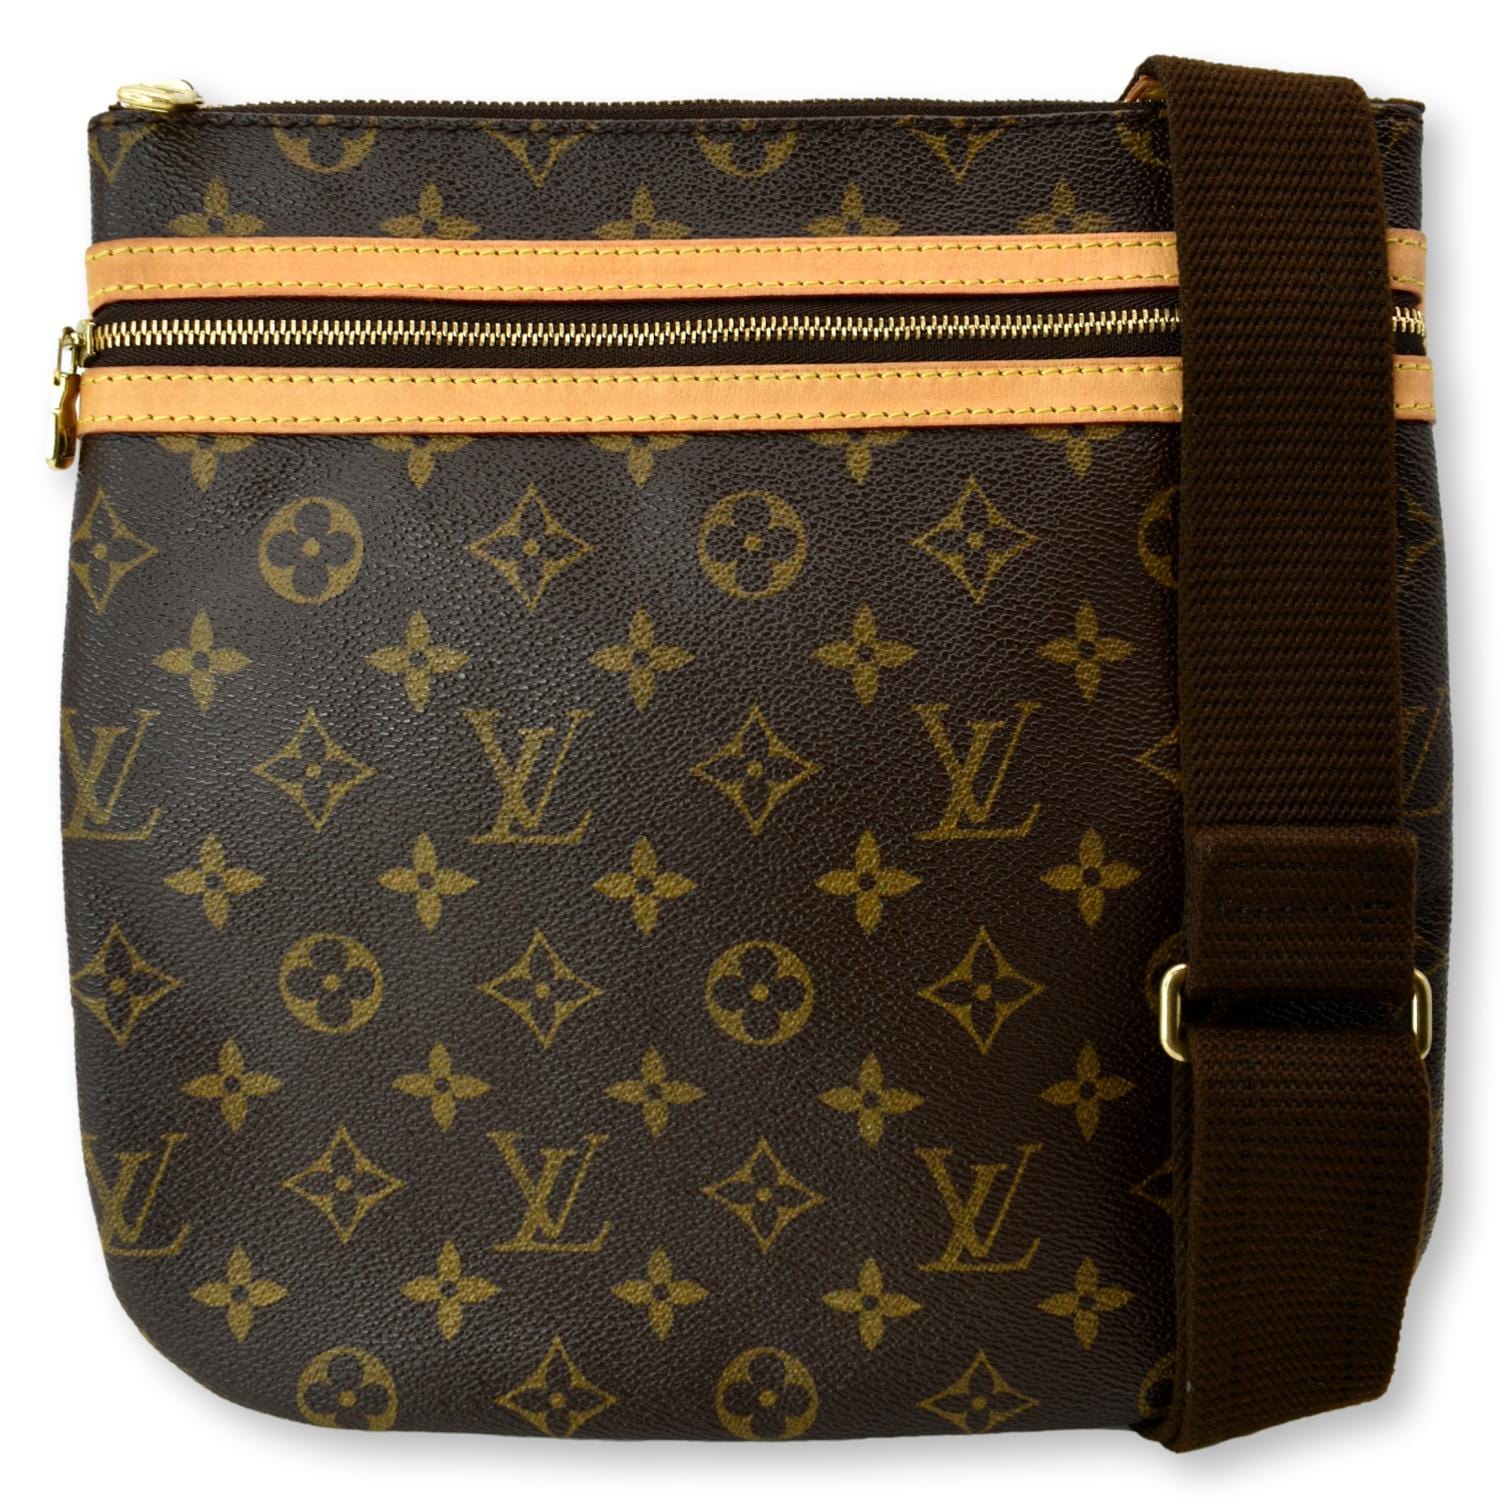 Shop for Louis Vuitton Monogram Canvas Leather Bosphore Pochette Crossbody  Bag - Shipped from USA